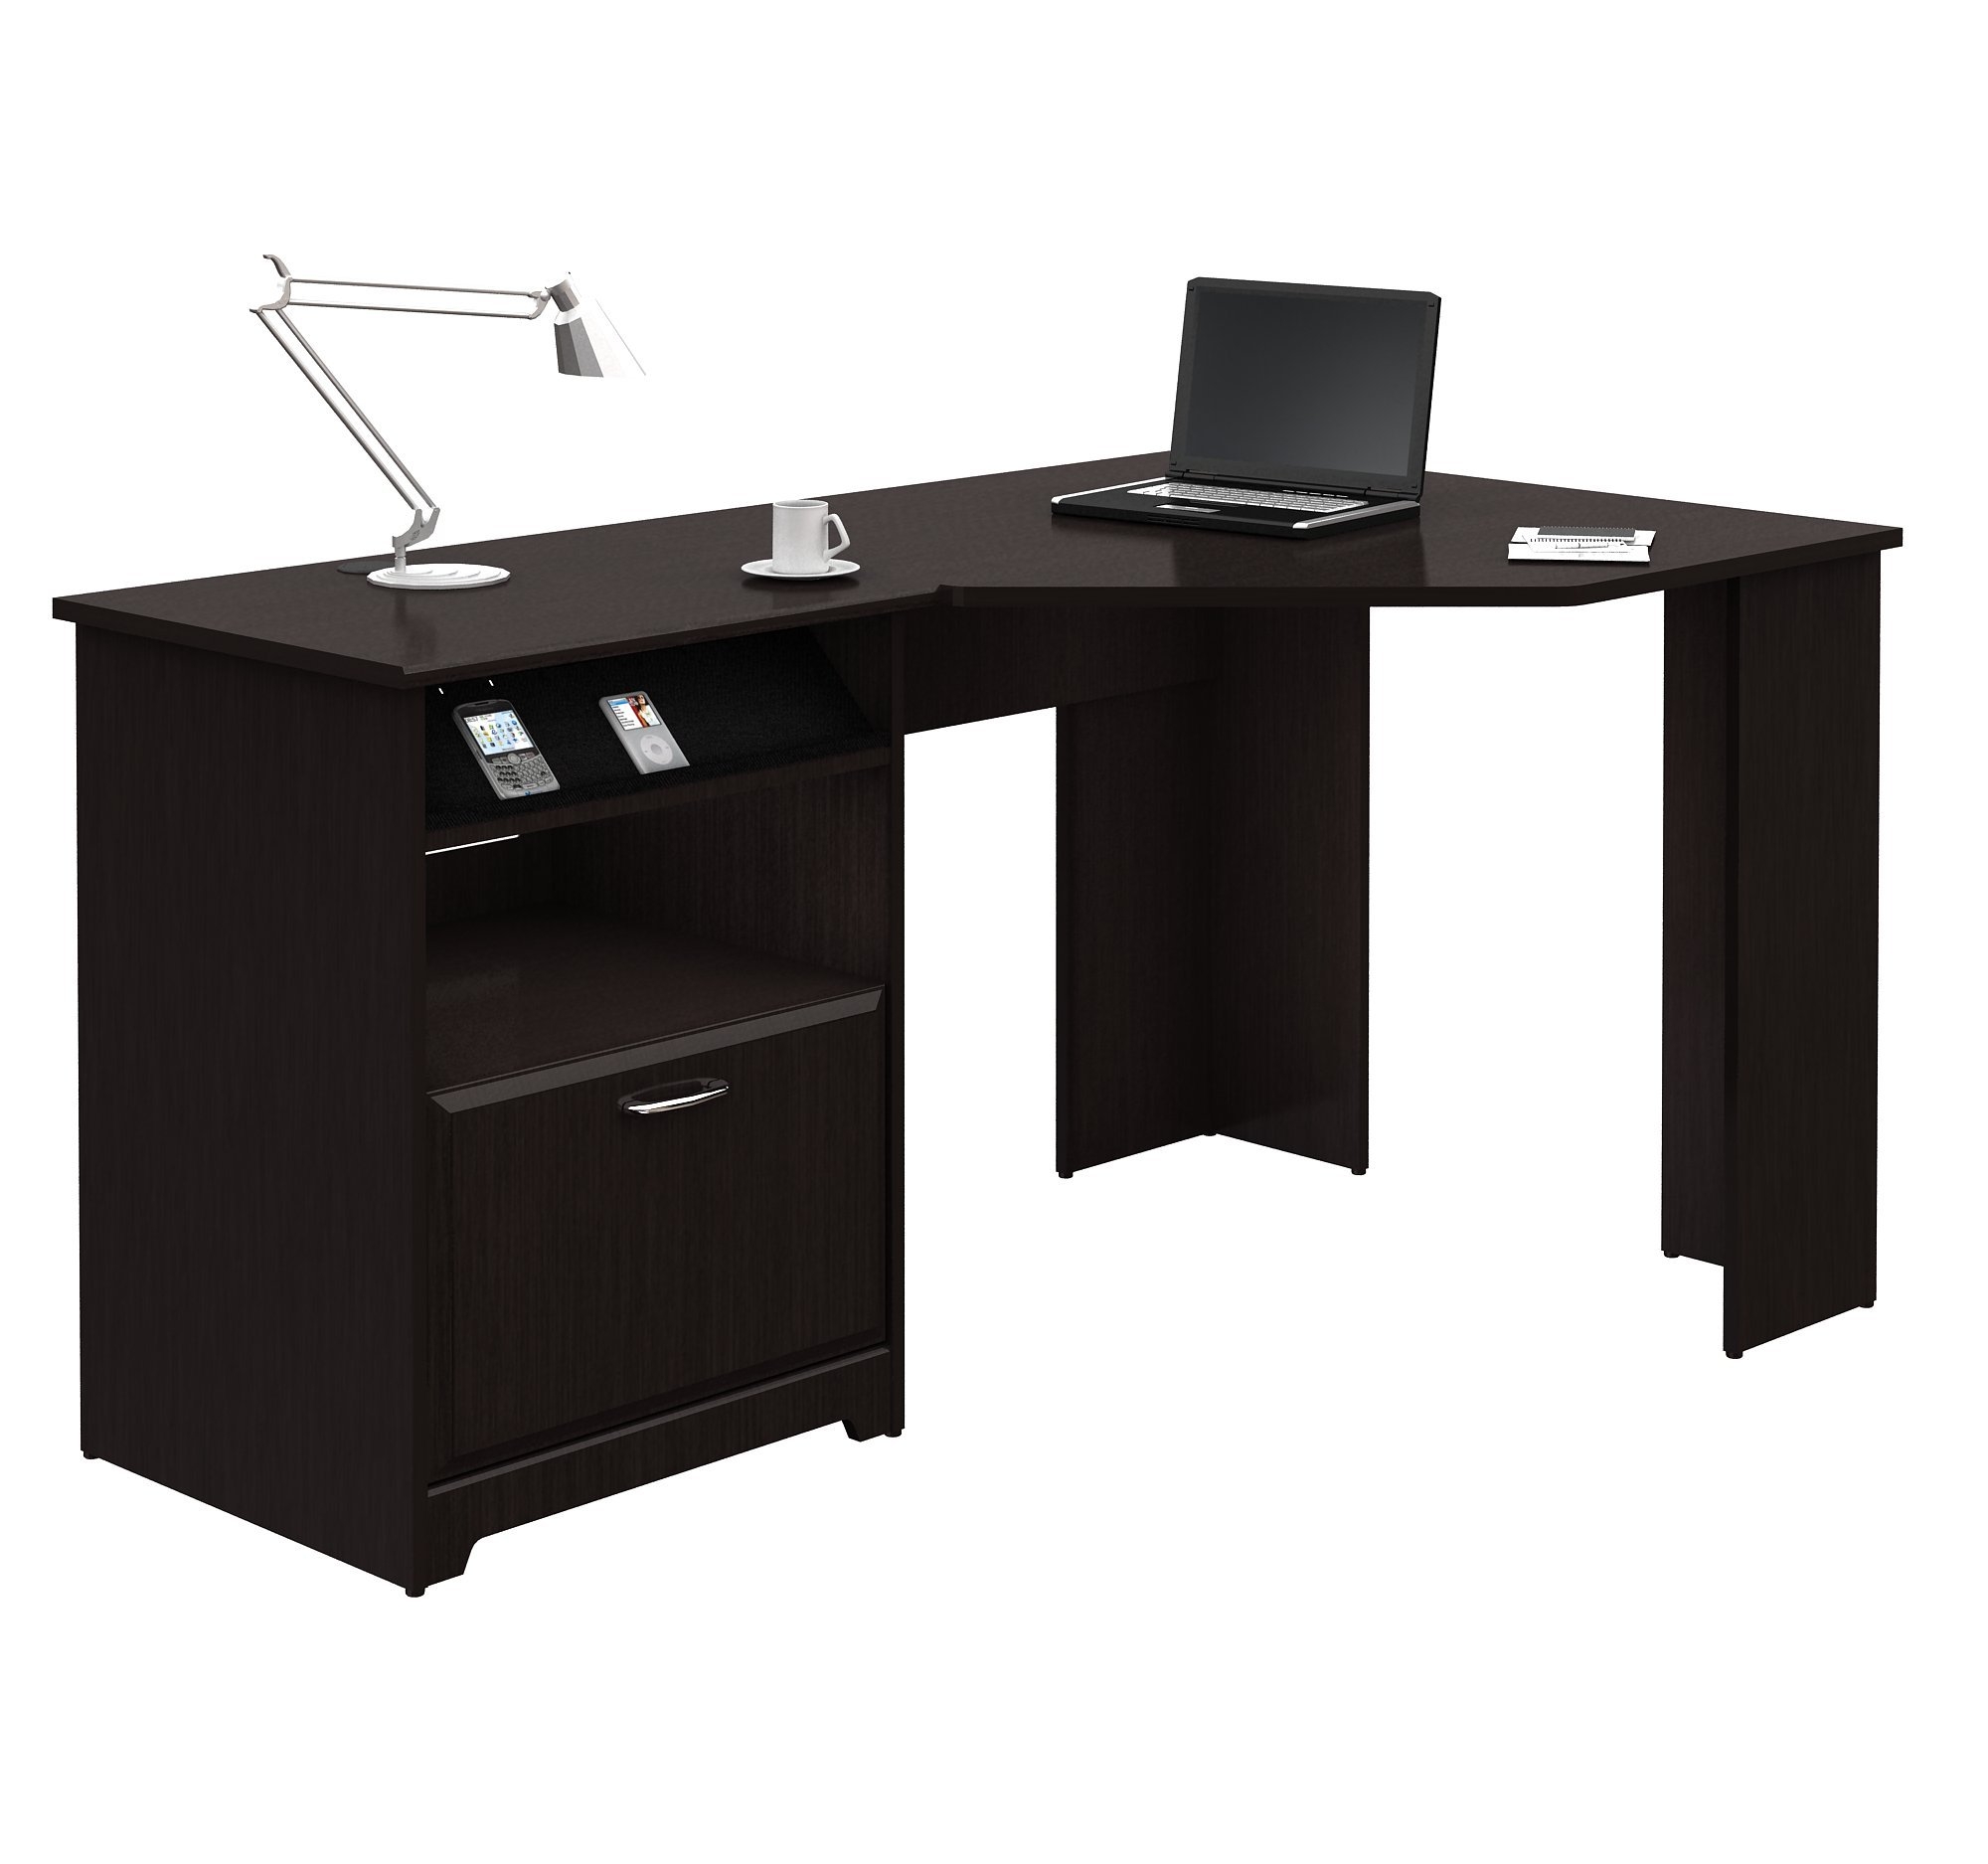 Corner computer desk with drawers